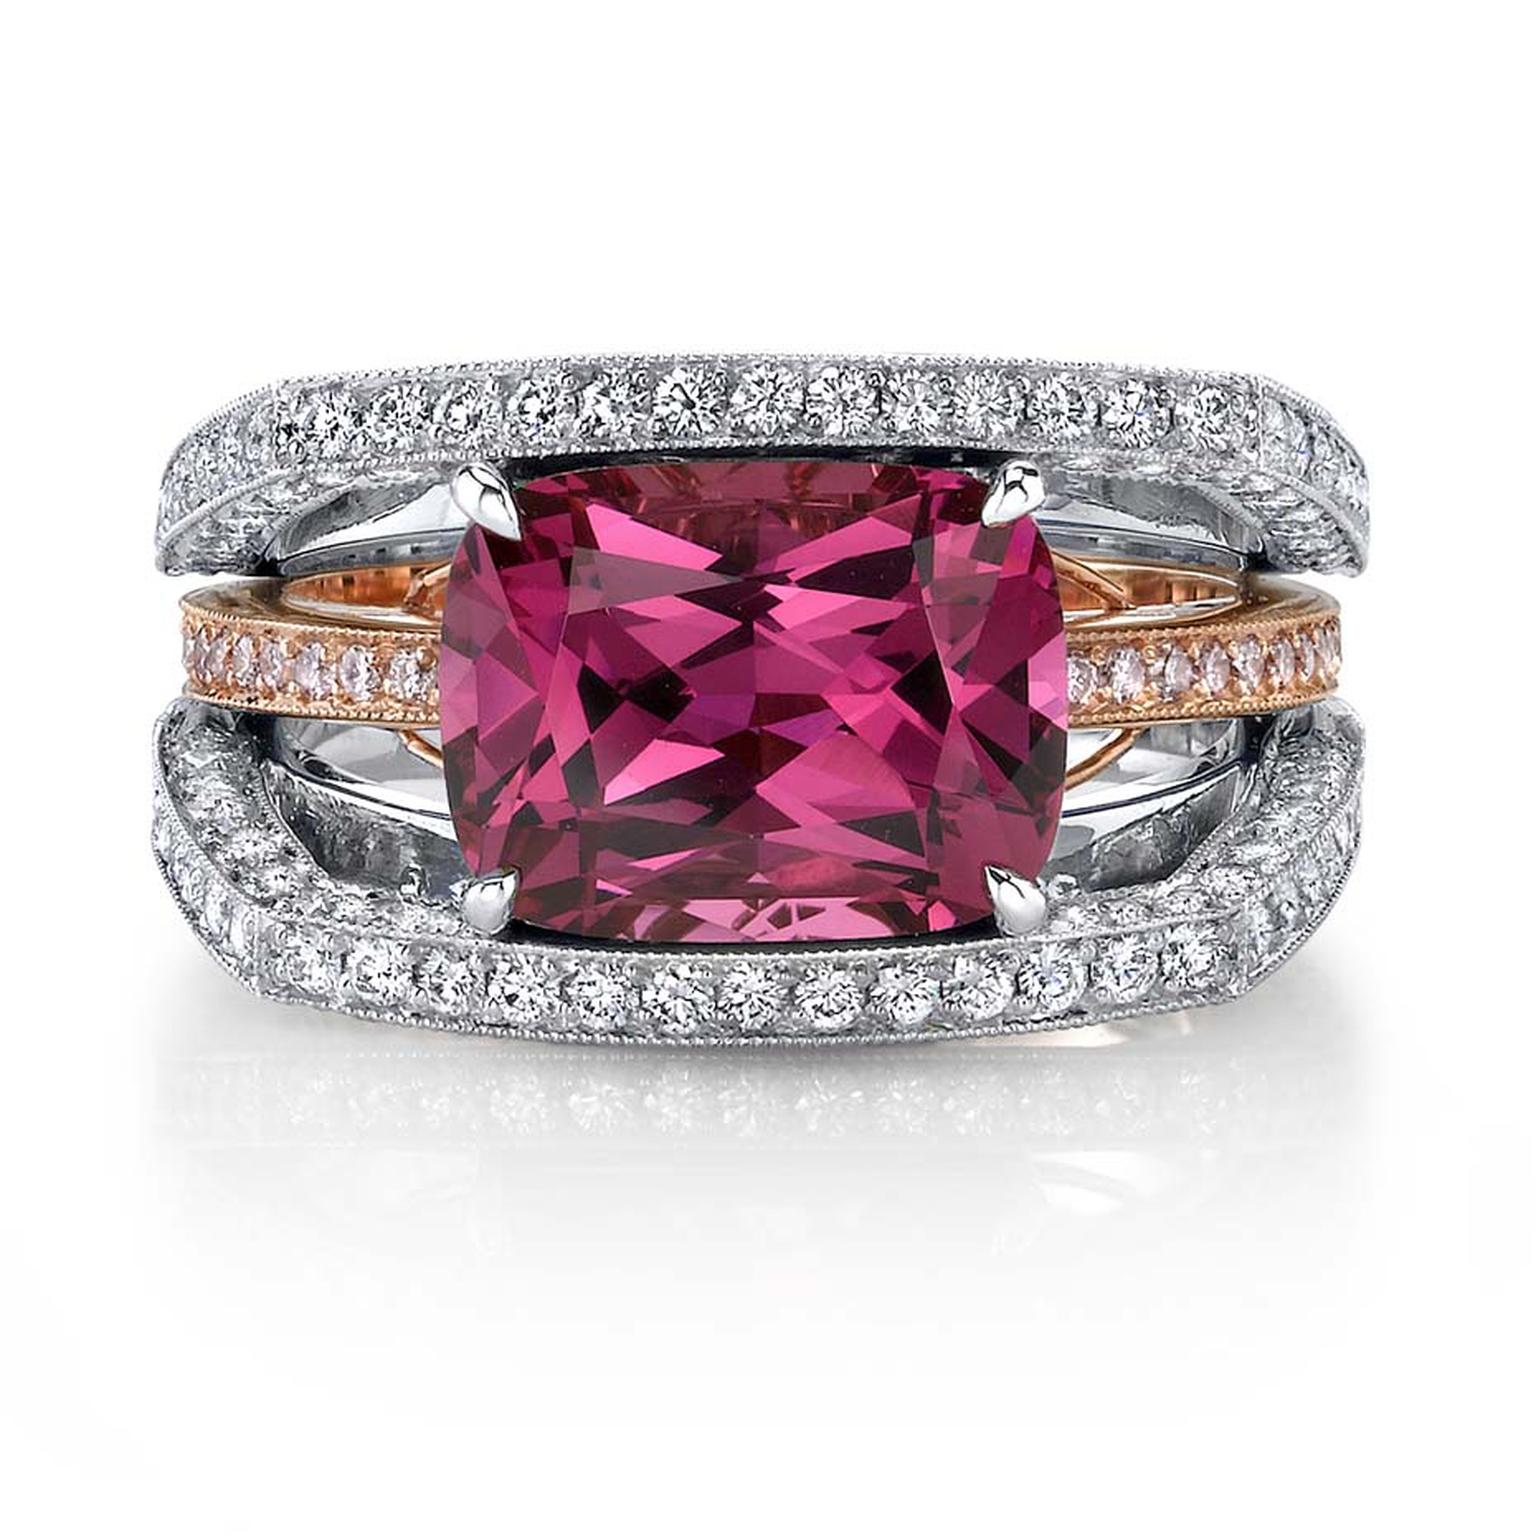 Omi Privé spinel and diamond ring